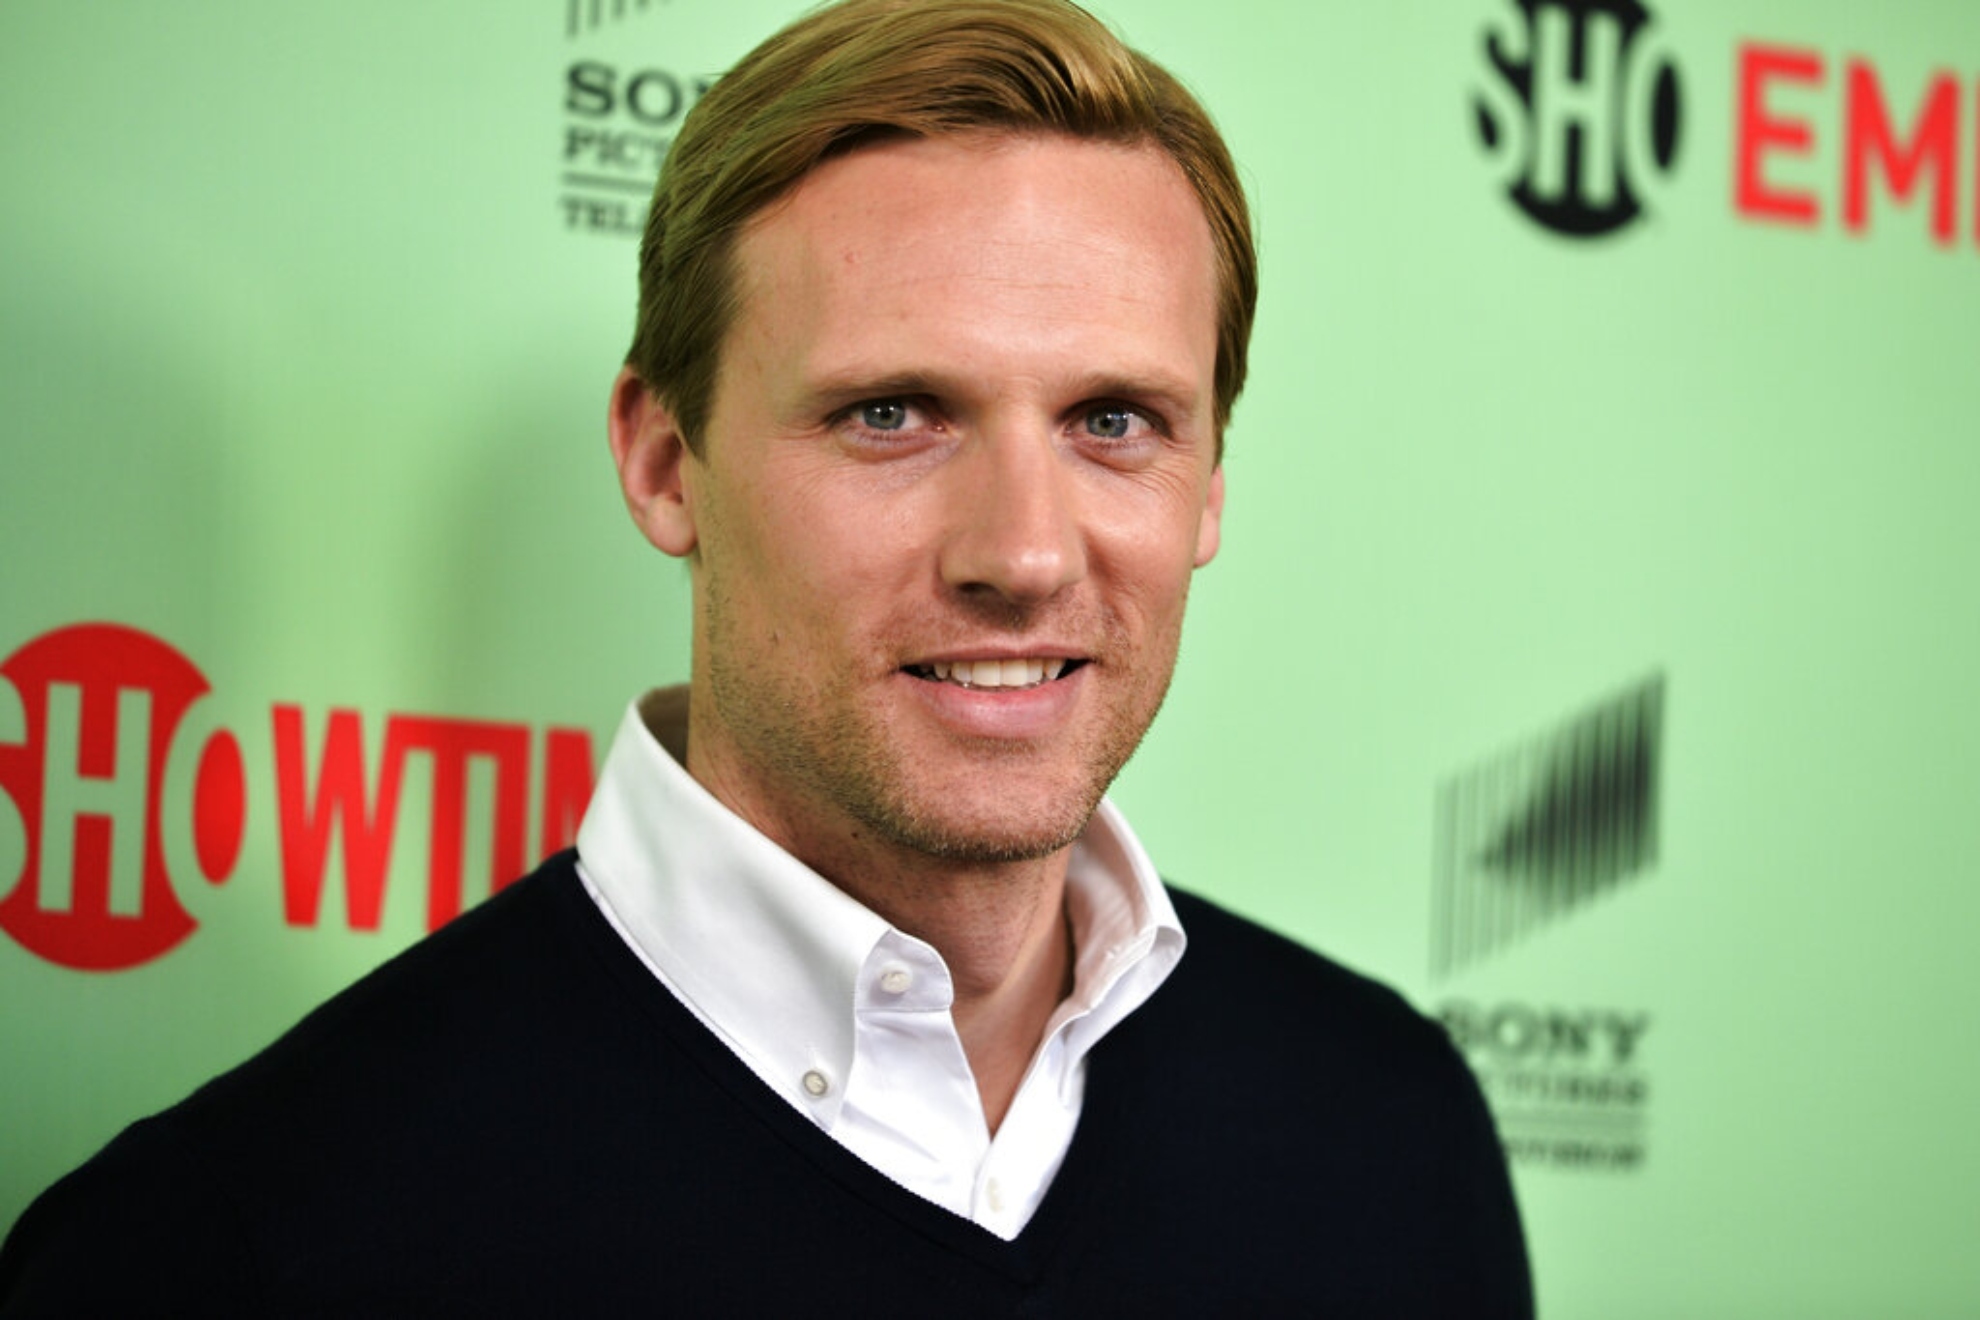 Teddy Sears comments on his role in The Flash film, raises AI-generated content questions